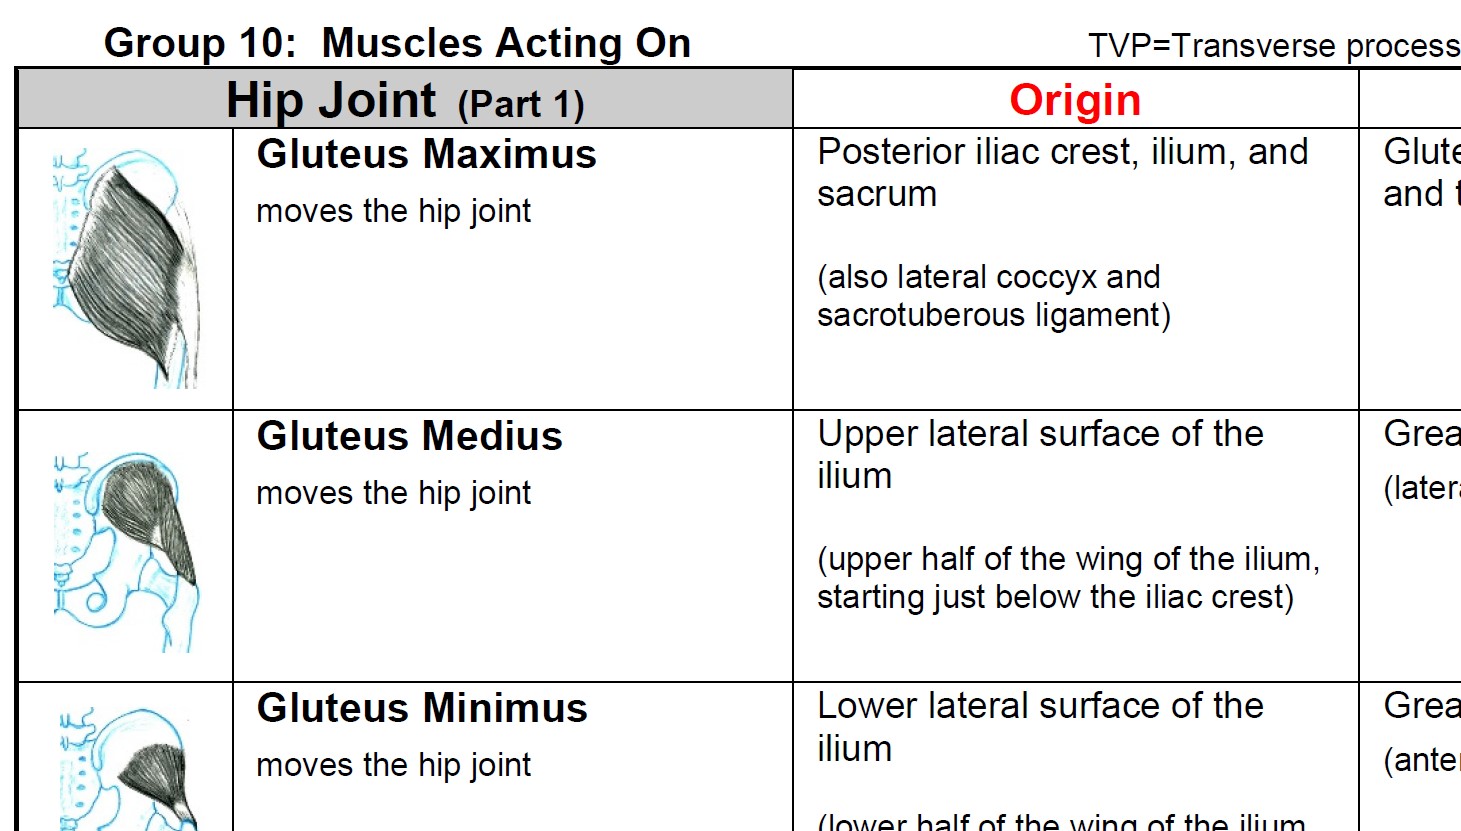 Muscle Group 10 - A Table